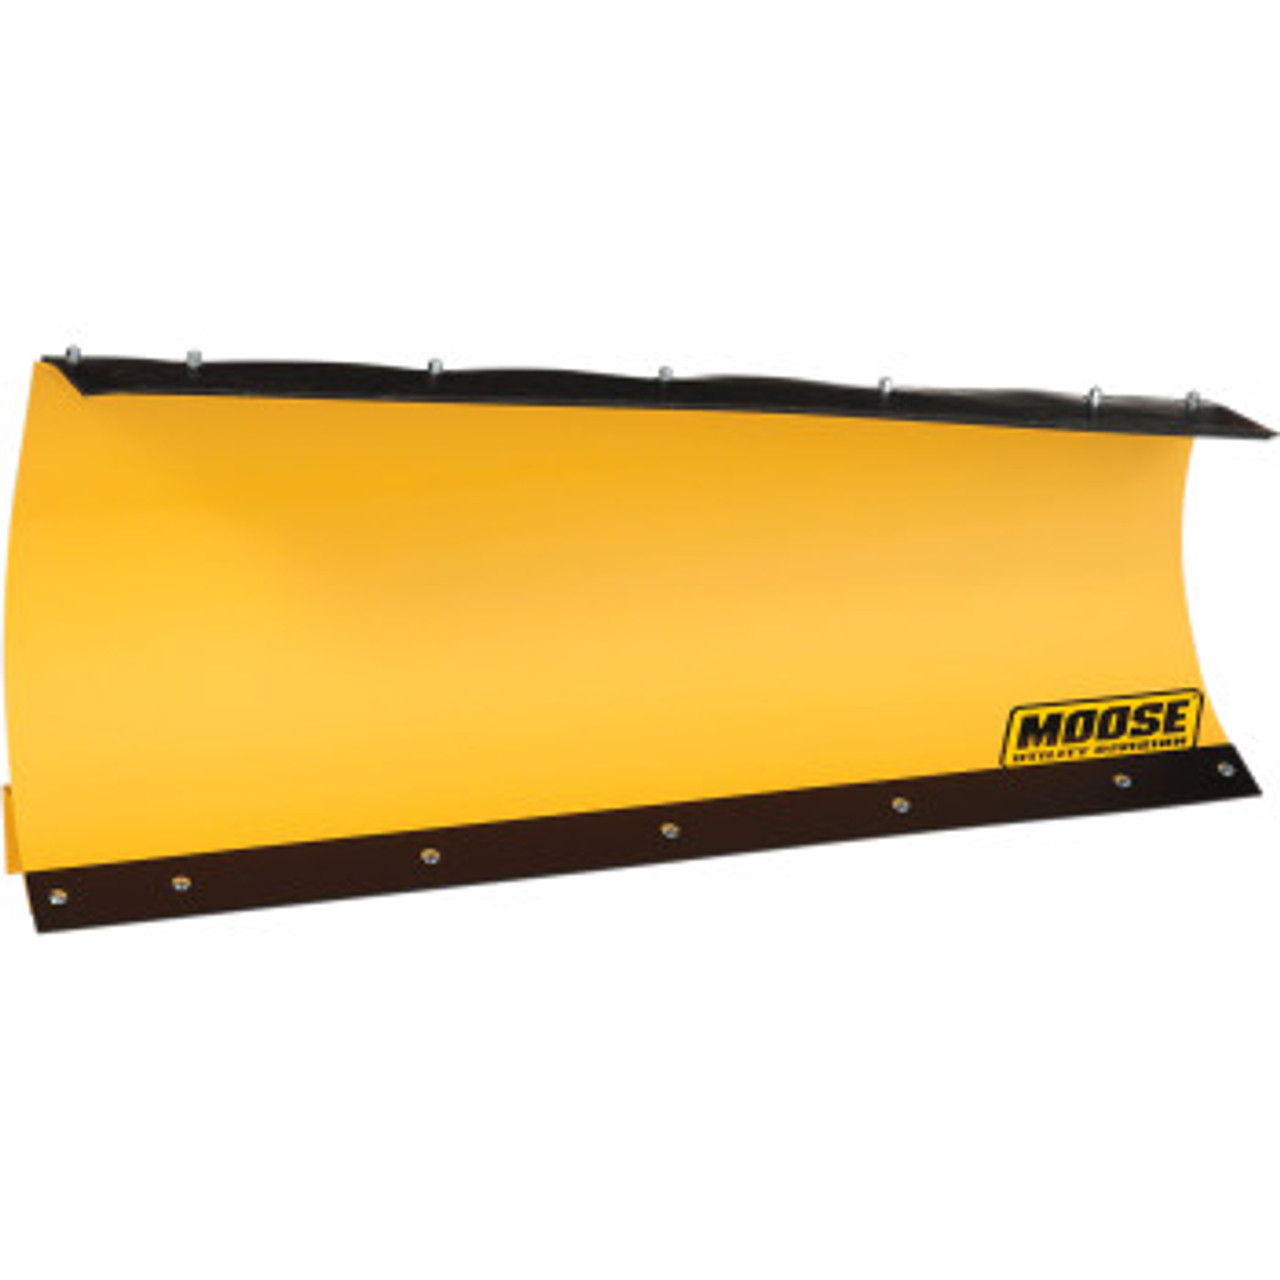 County Plow Blade - 50" - Yellow